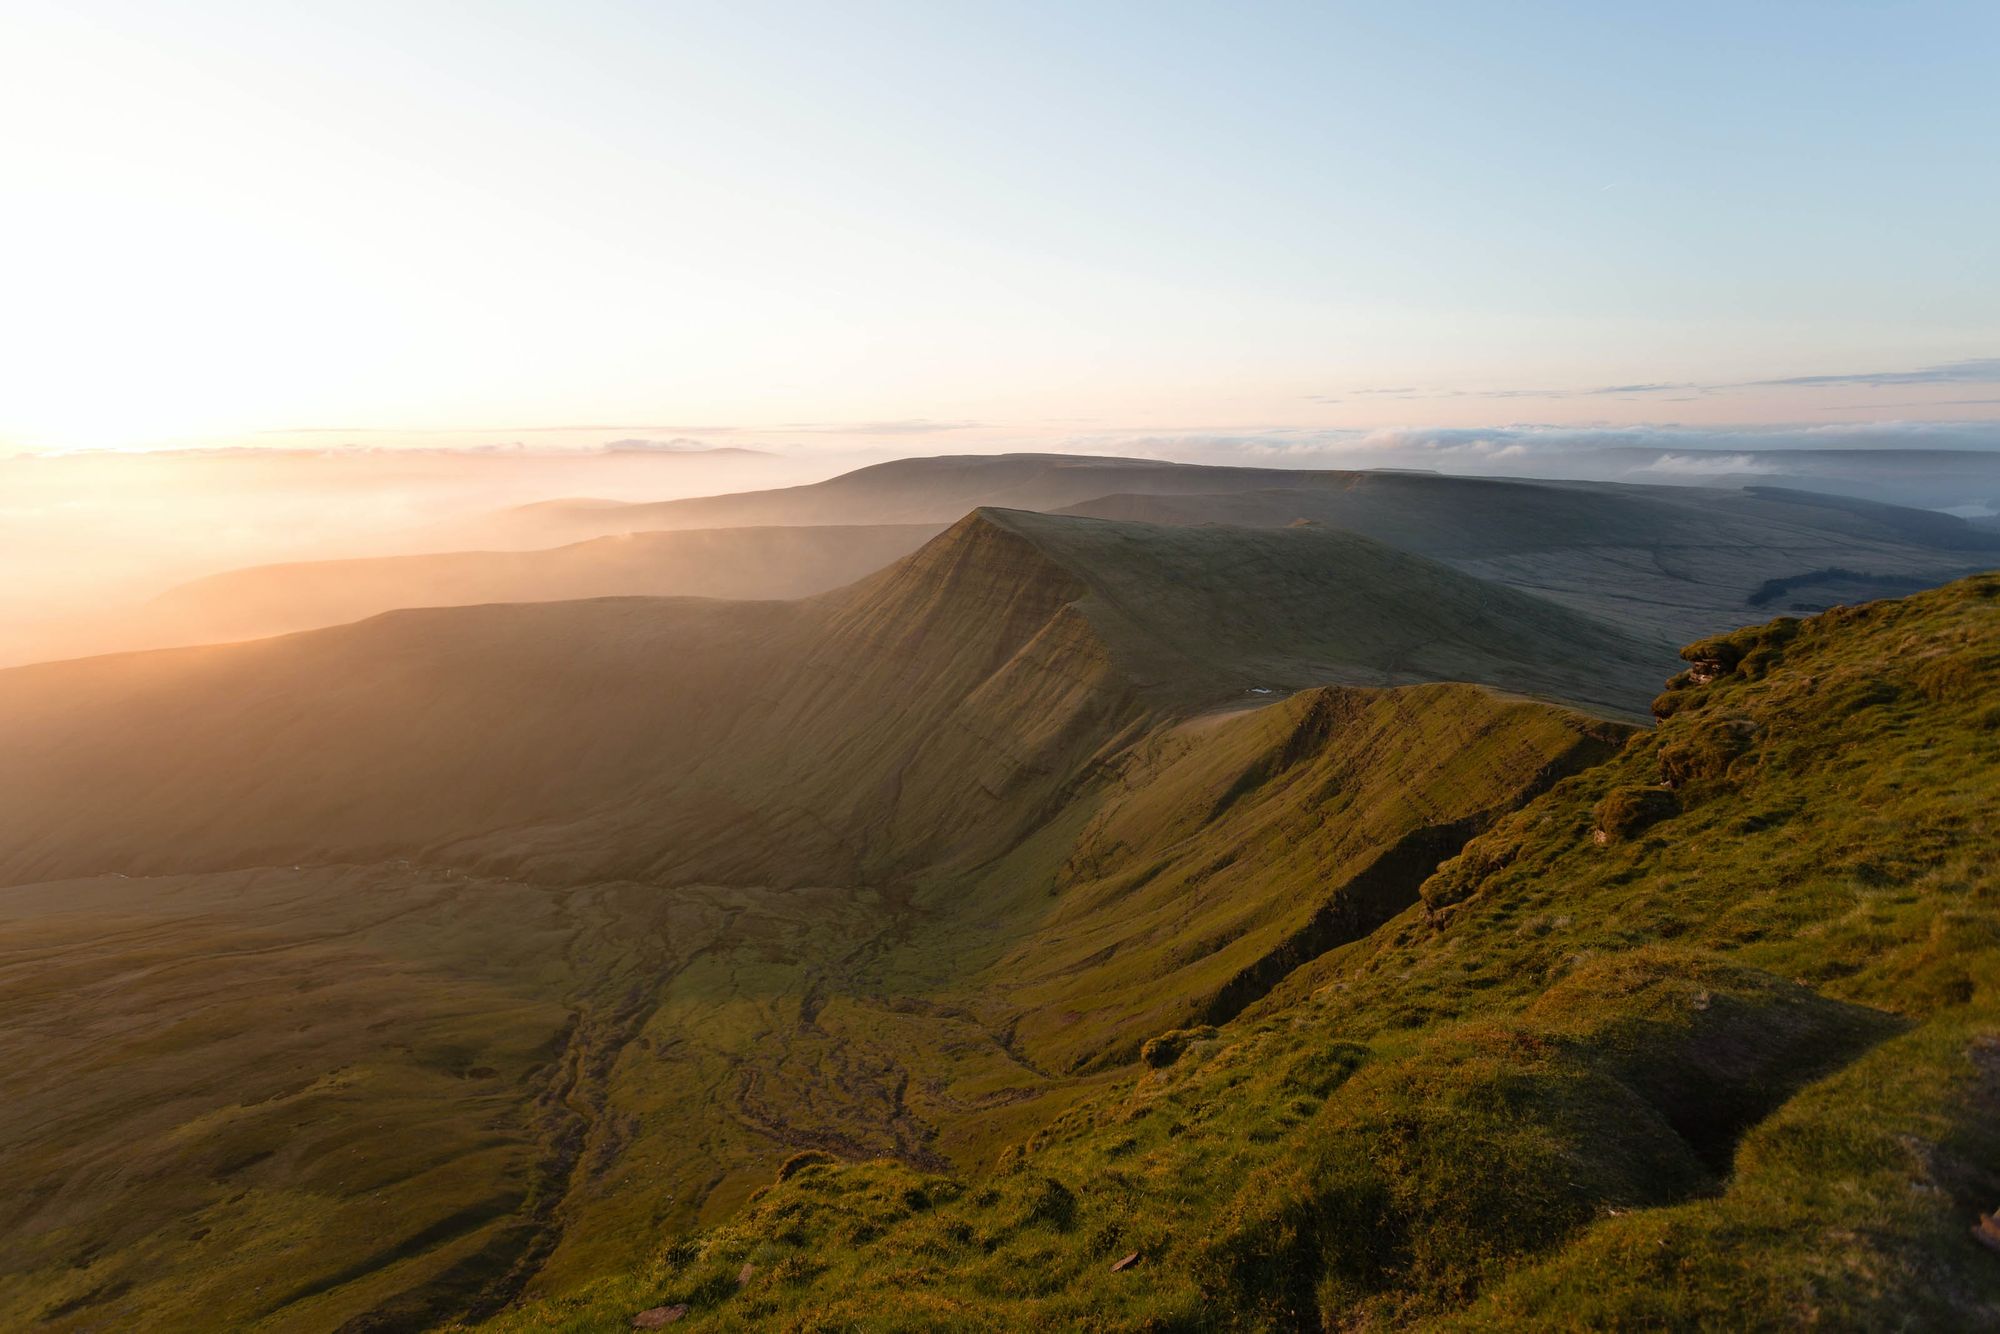 Uk mountains - Pen y Fan and the Brecon Beacons